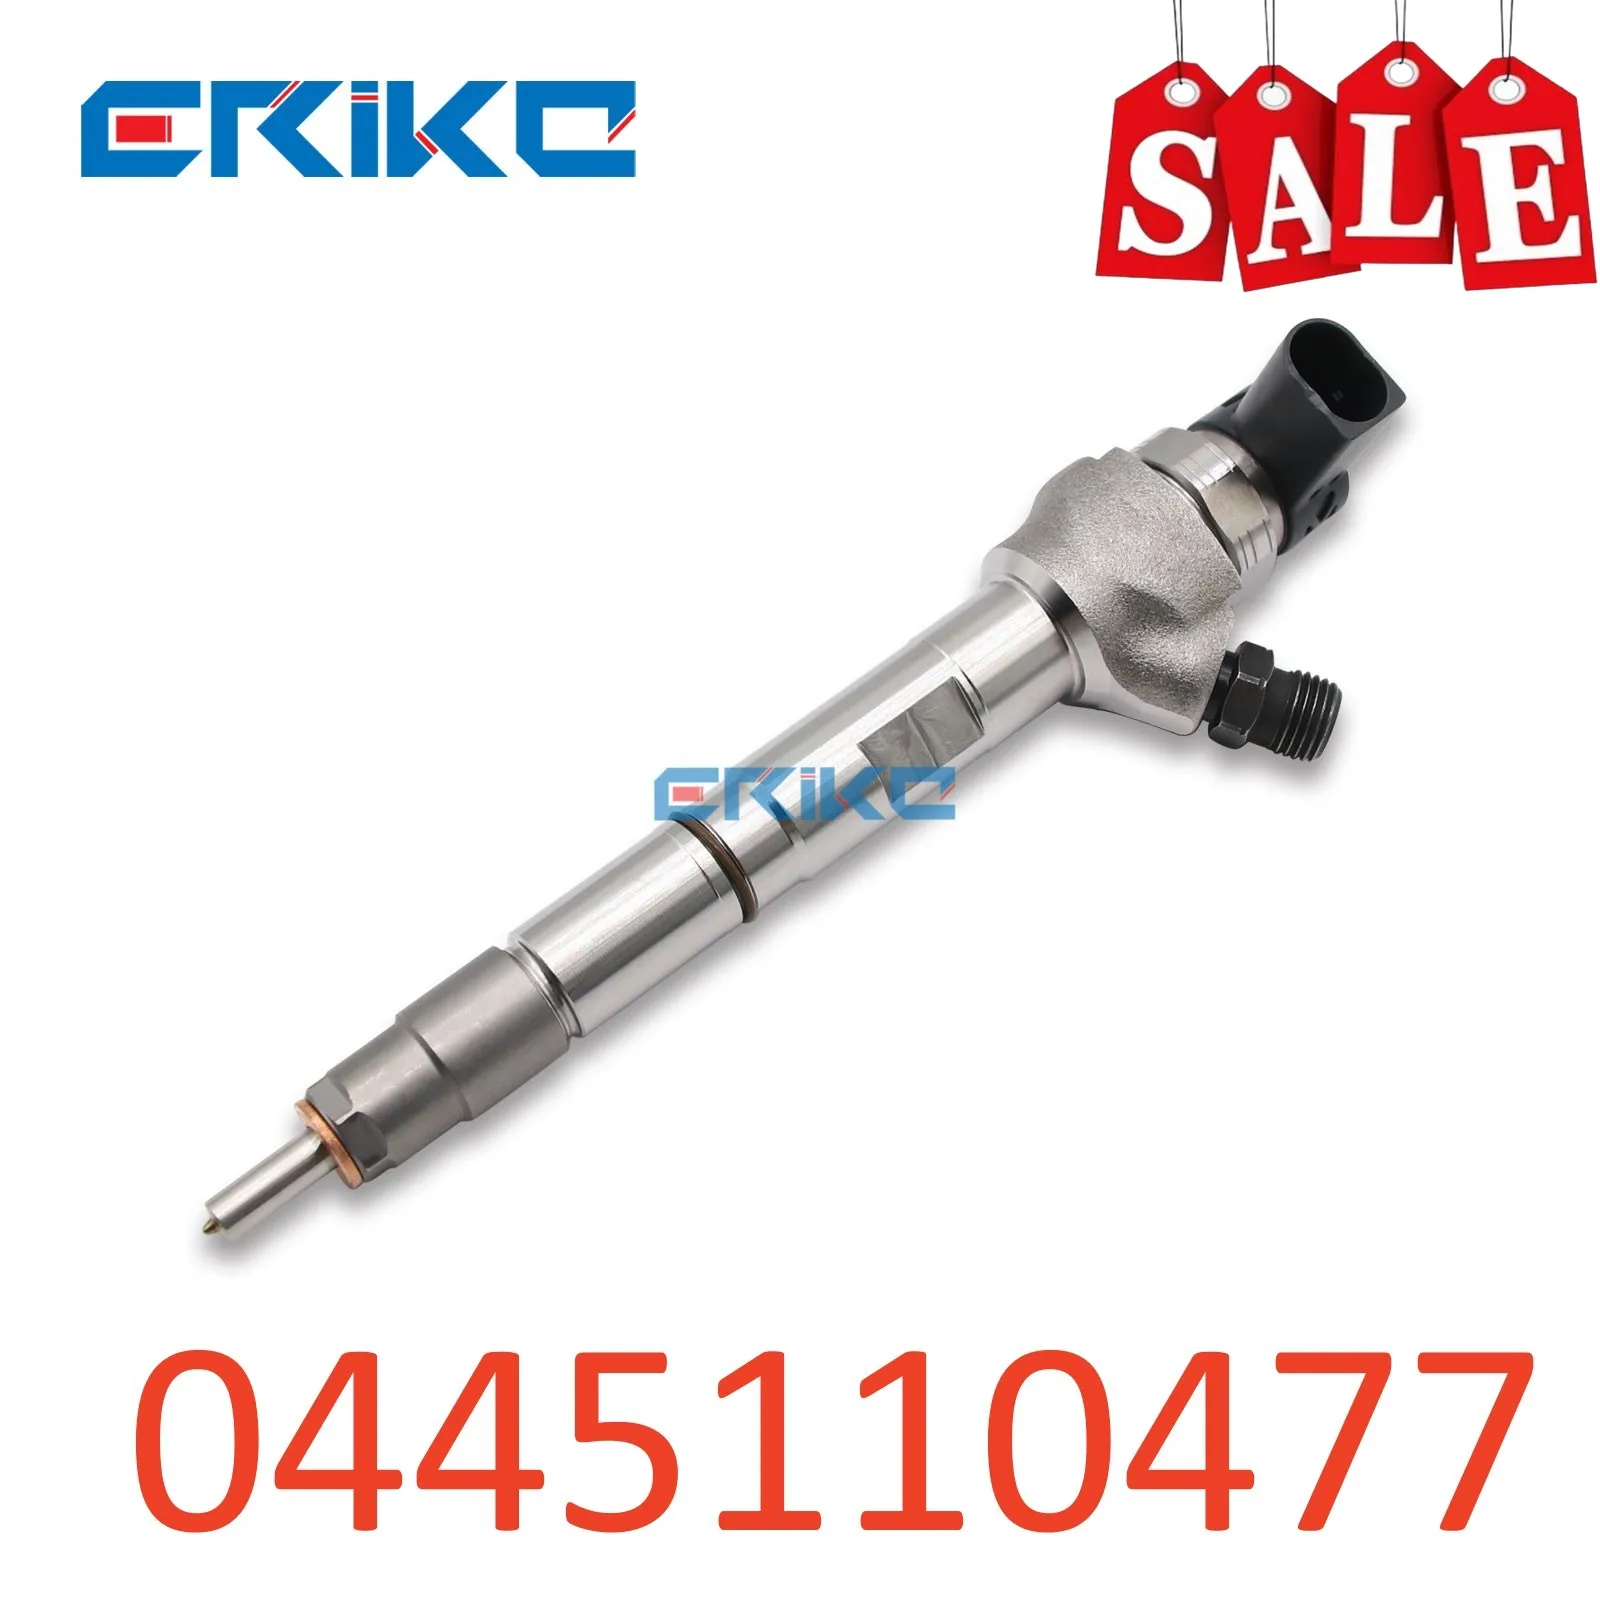 

0445110477 Injector Original 0 445 110 477 Common Rail Direct Injection 0445 110 477 04L130277G for AUDI SEAT 1.6 TDI